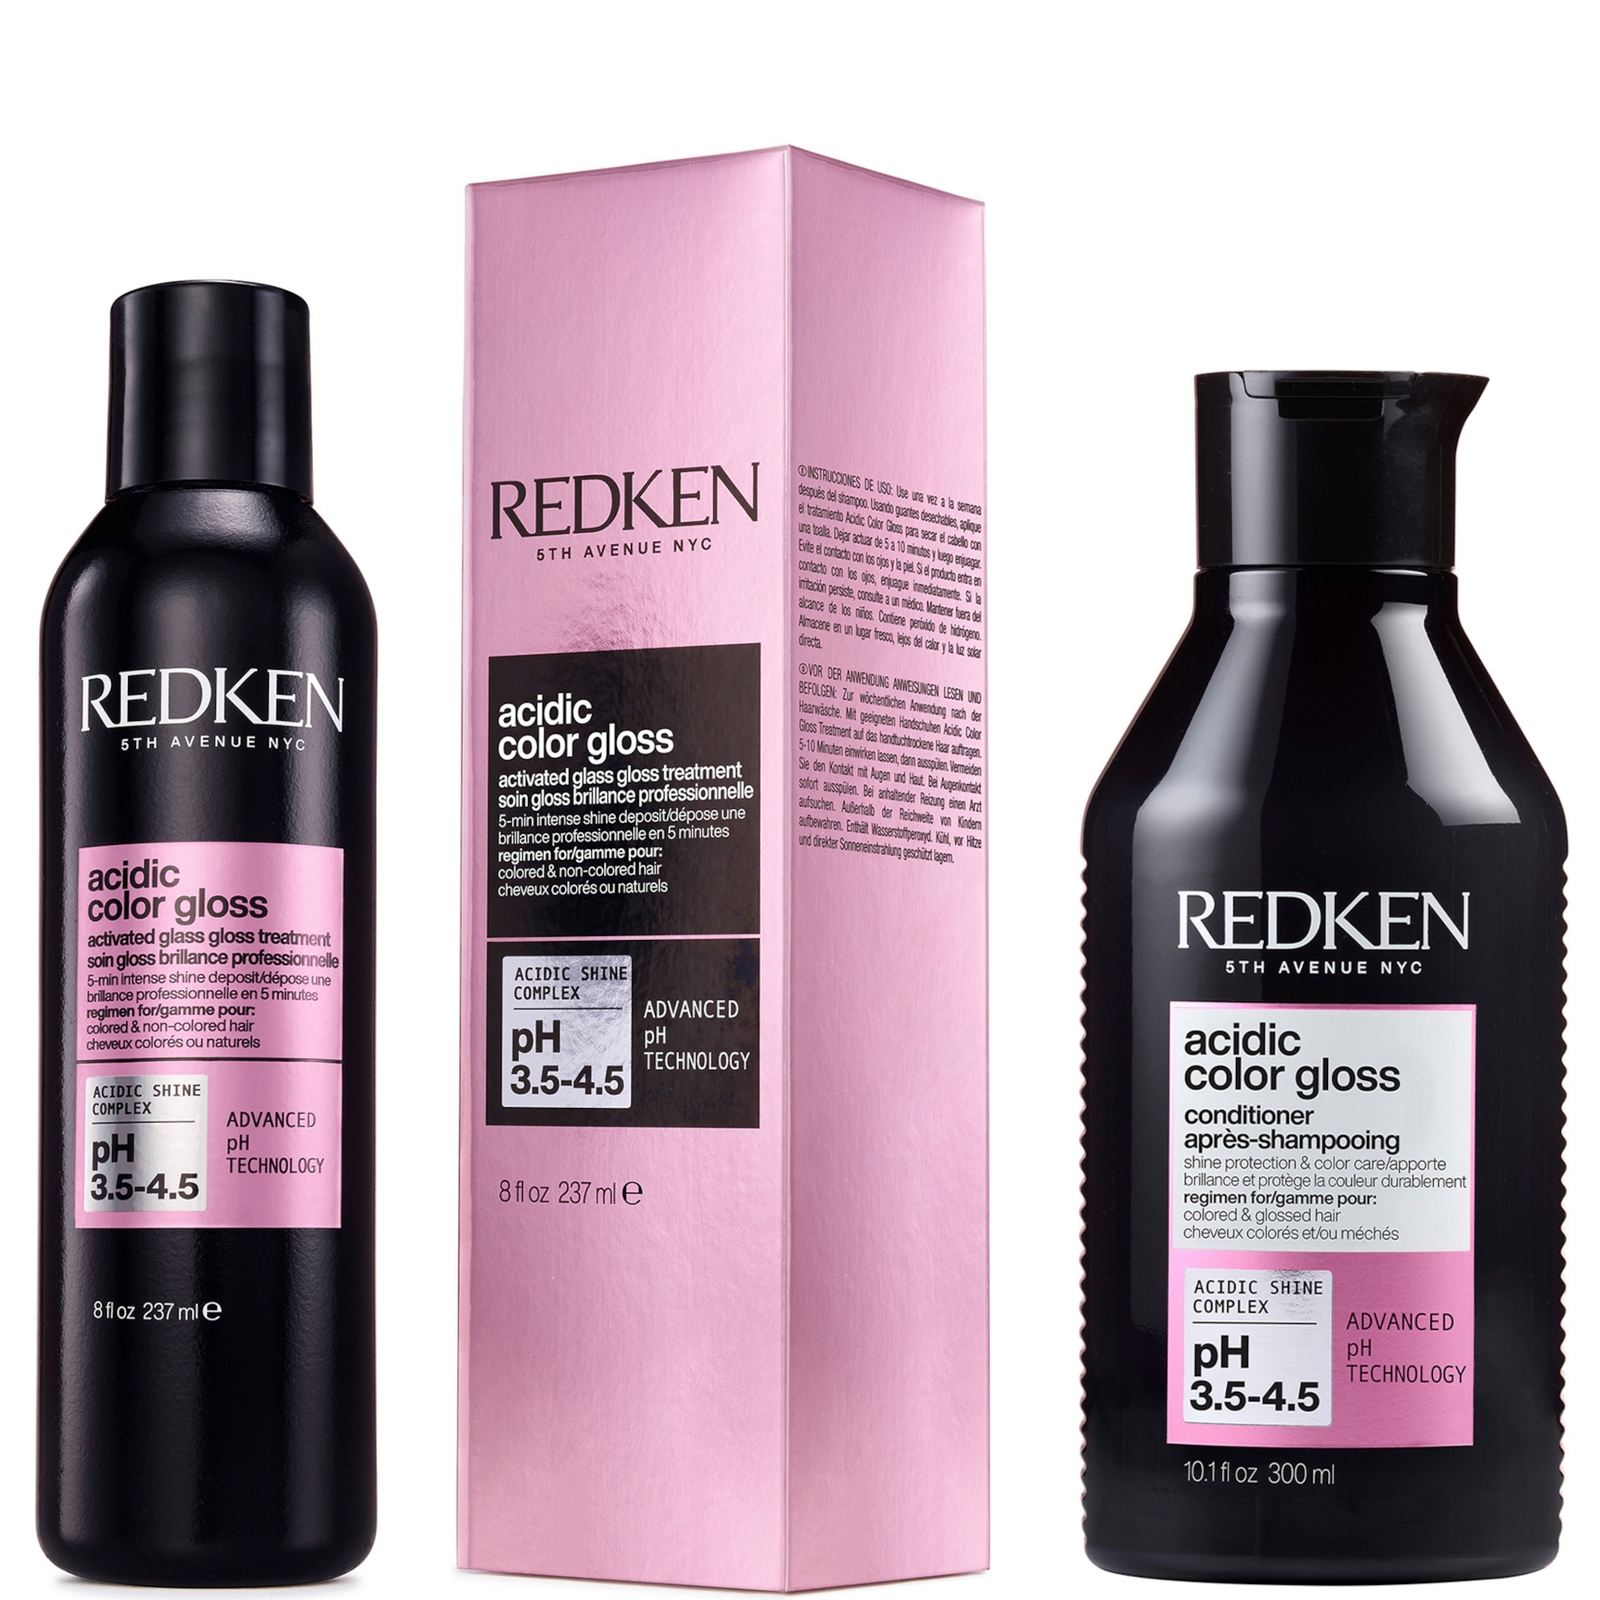 Redken Acidic Color Gloss Activated Glass Gloss Treatment 237ml and Conditioner 300ml, Colour Protec